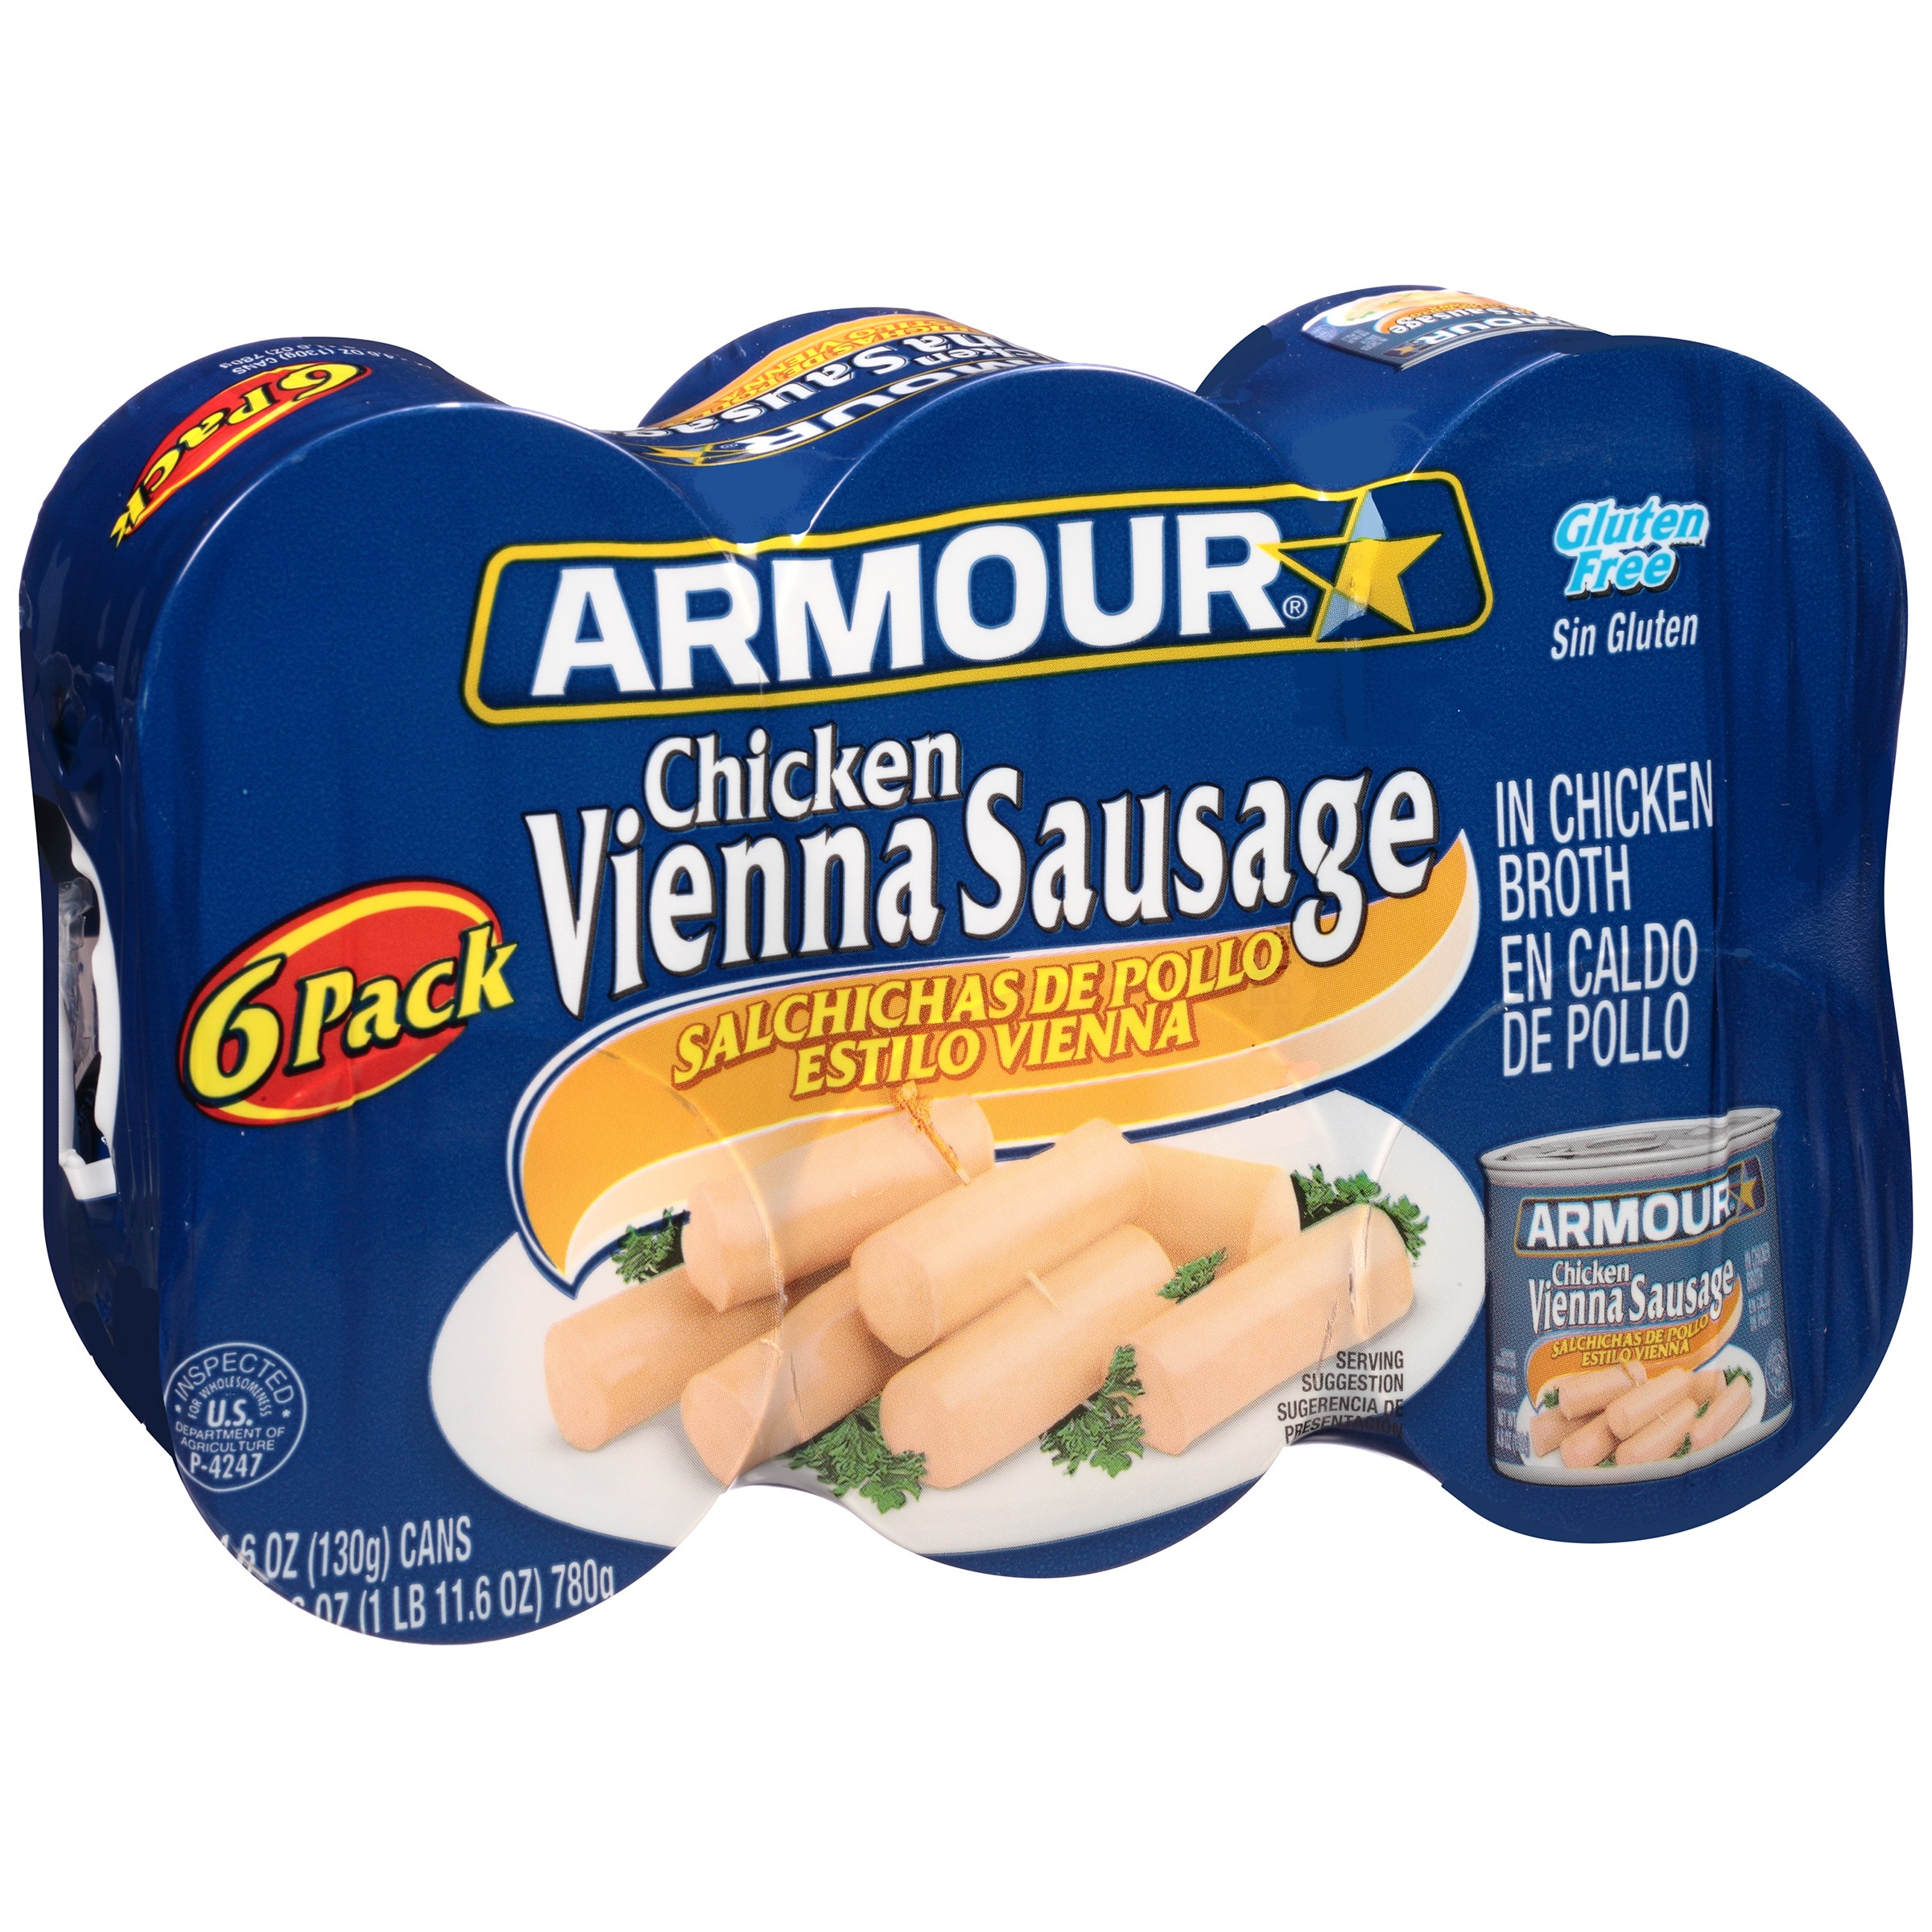 6 pack Armour Vienna Sausage, Chicken, Keto Friendly, 4.6 Oz: $2.83 or less...